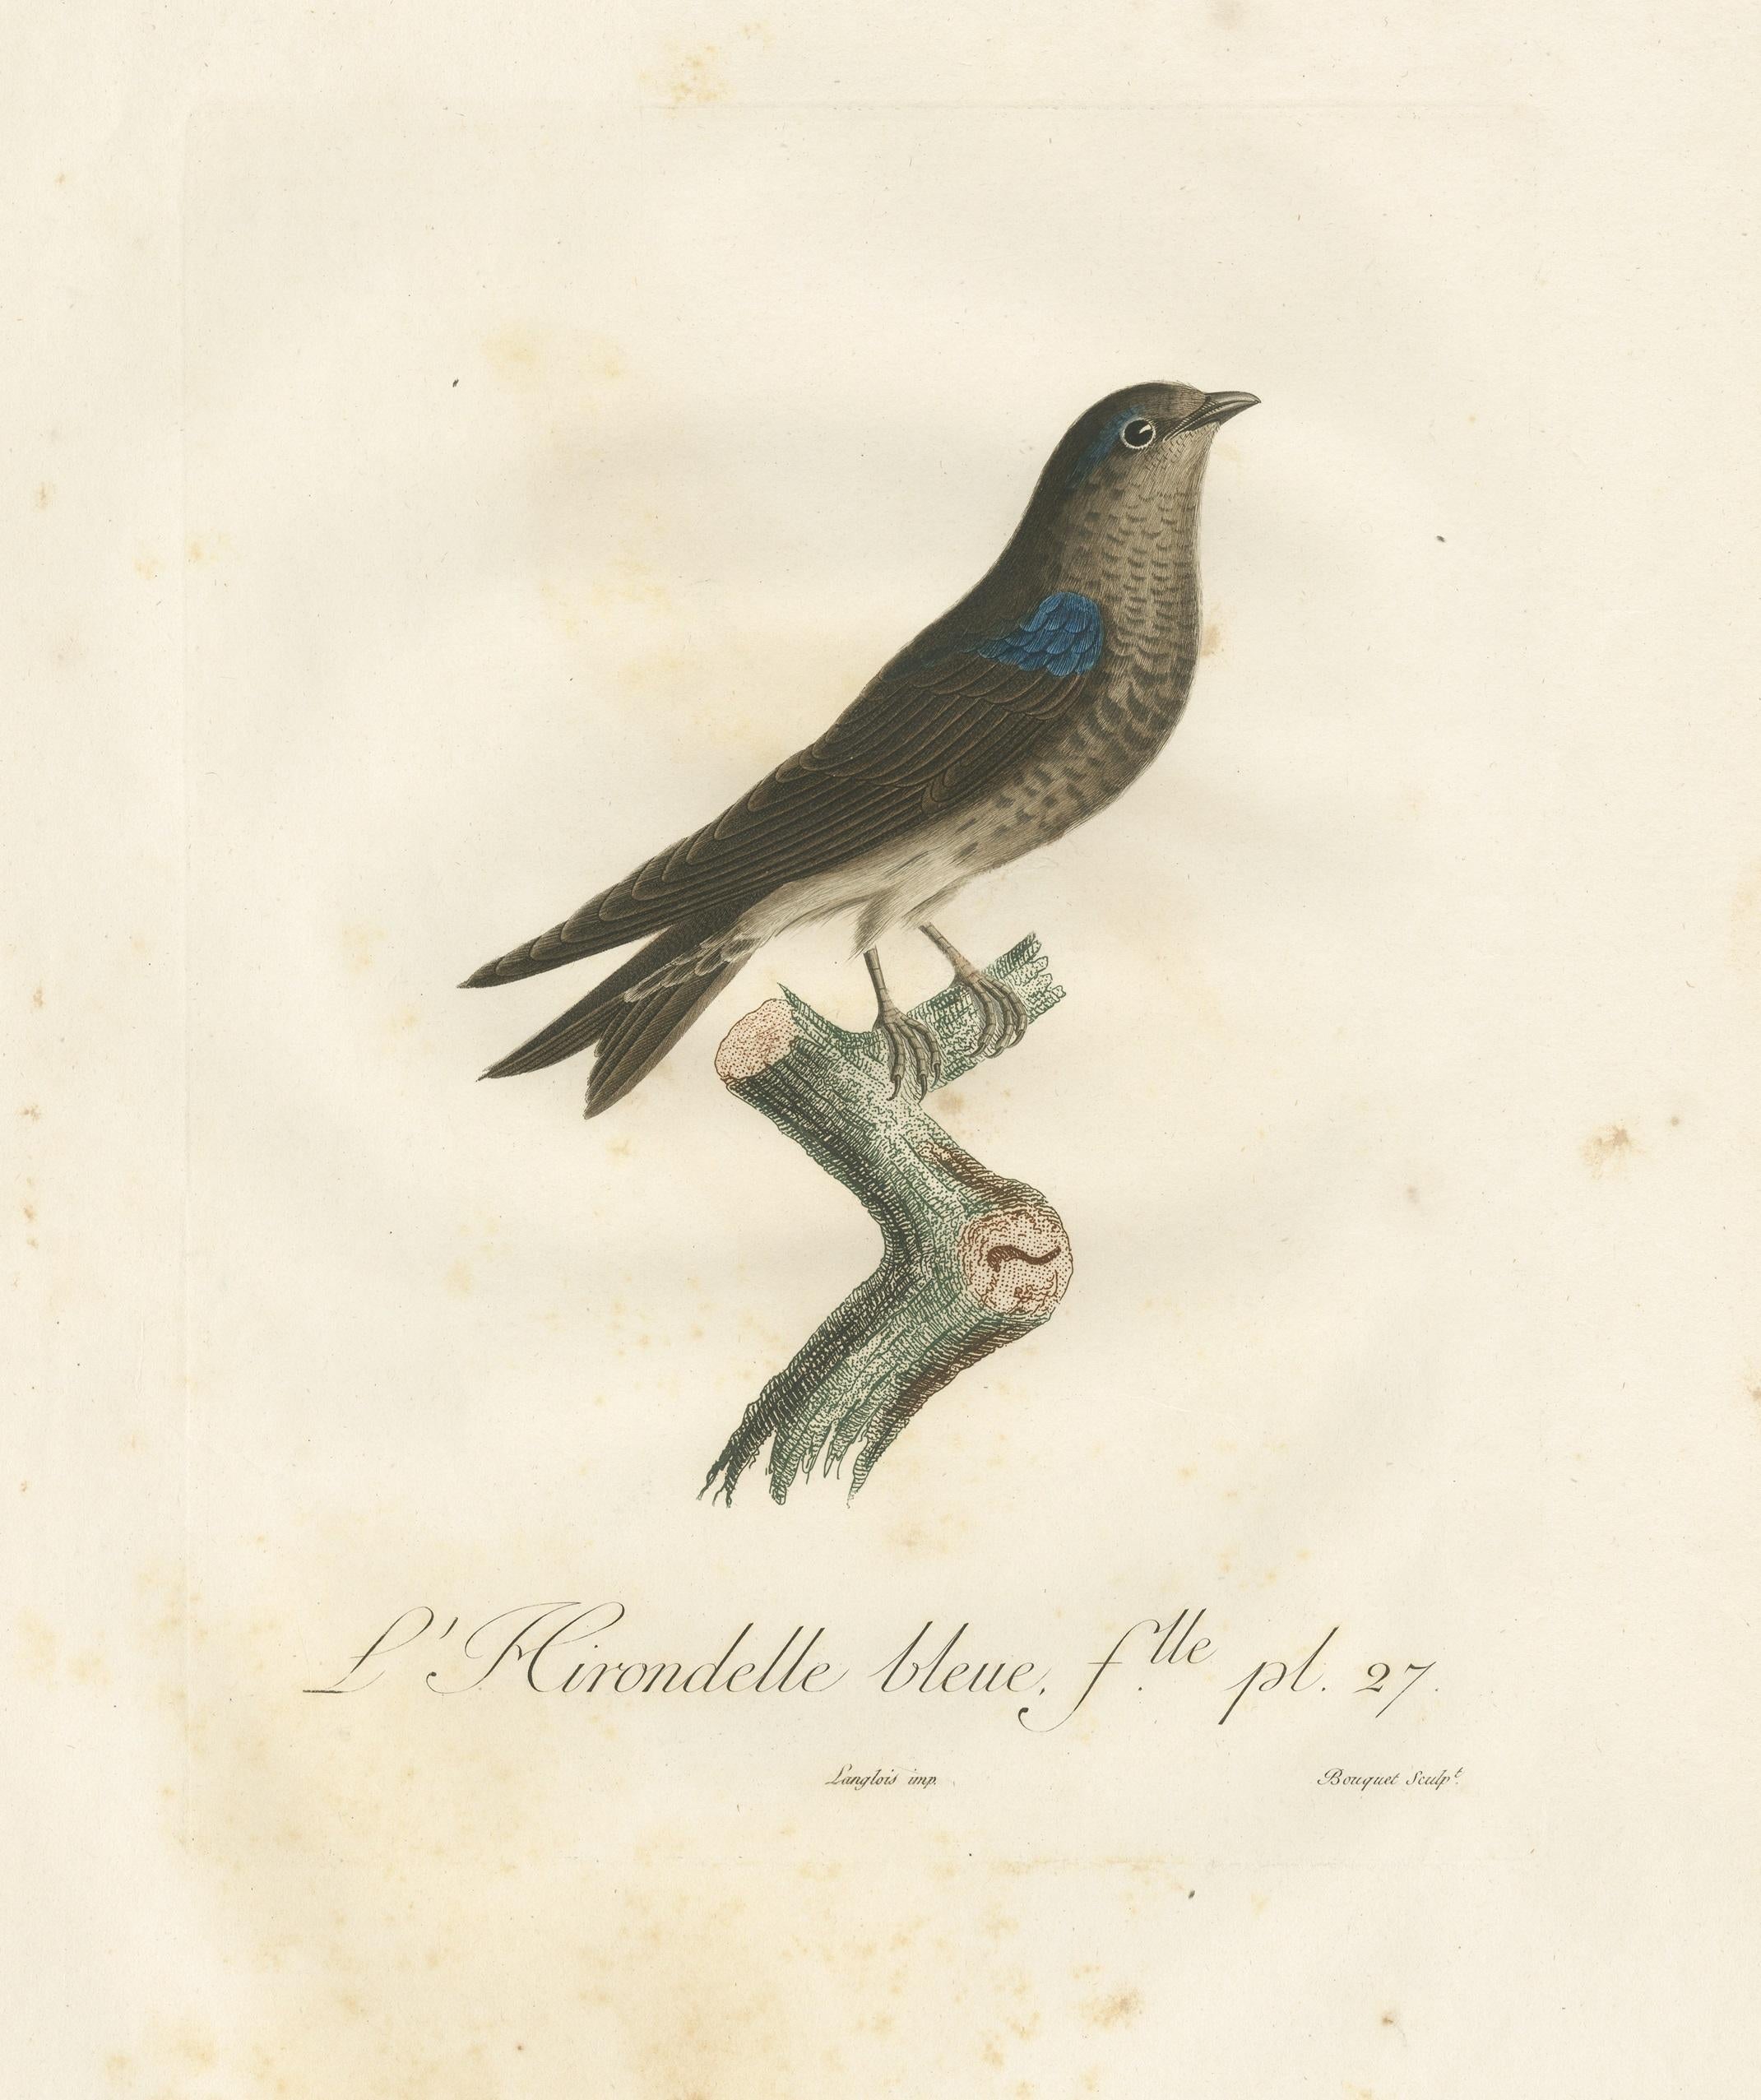 19th Century Feathered Sapphire: The Blue Swallow – A Vieillot Hand-Colored Print from 1807 For Sale